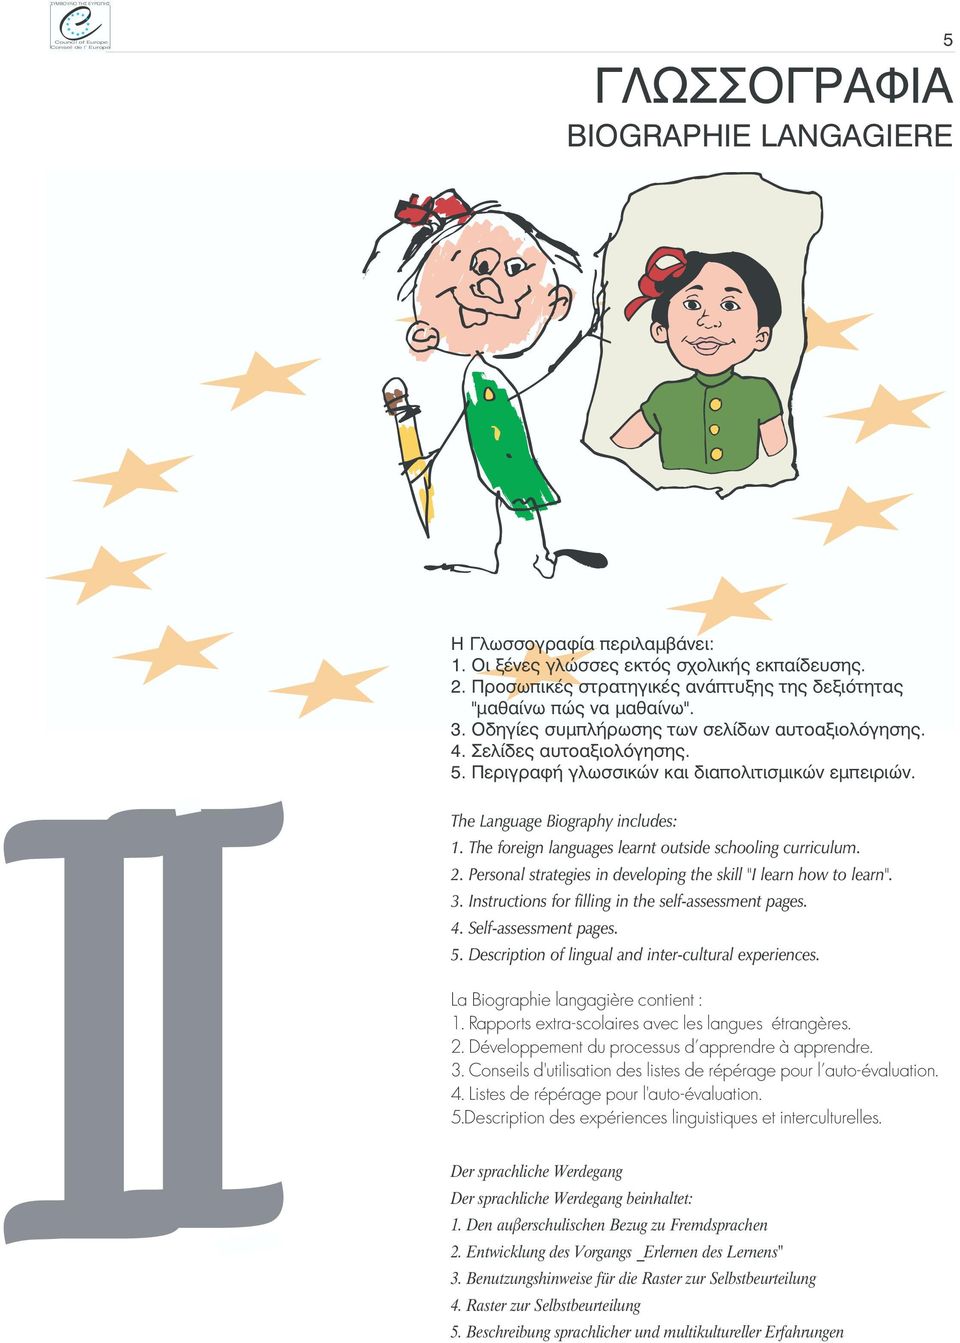 The foreign languages learnt outside schooling curriculum. 2. Personal strategies in developing the skill "I learn how to learn". 3. Instructions for filling in the self-assessment pages. 4.